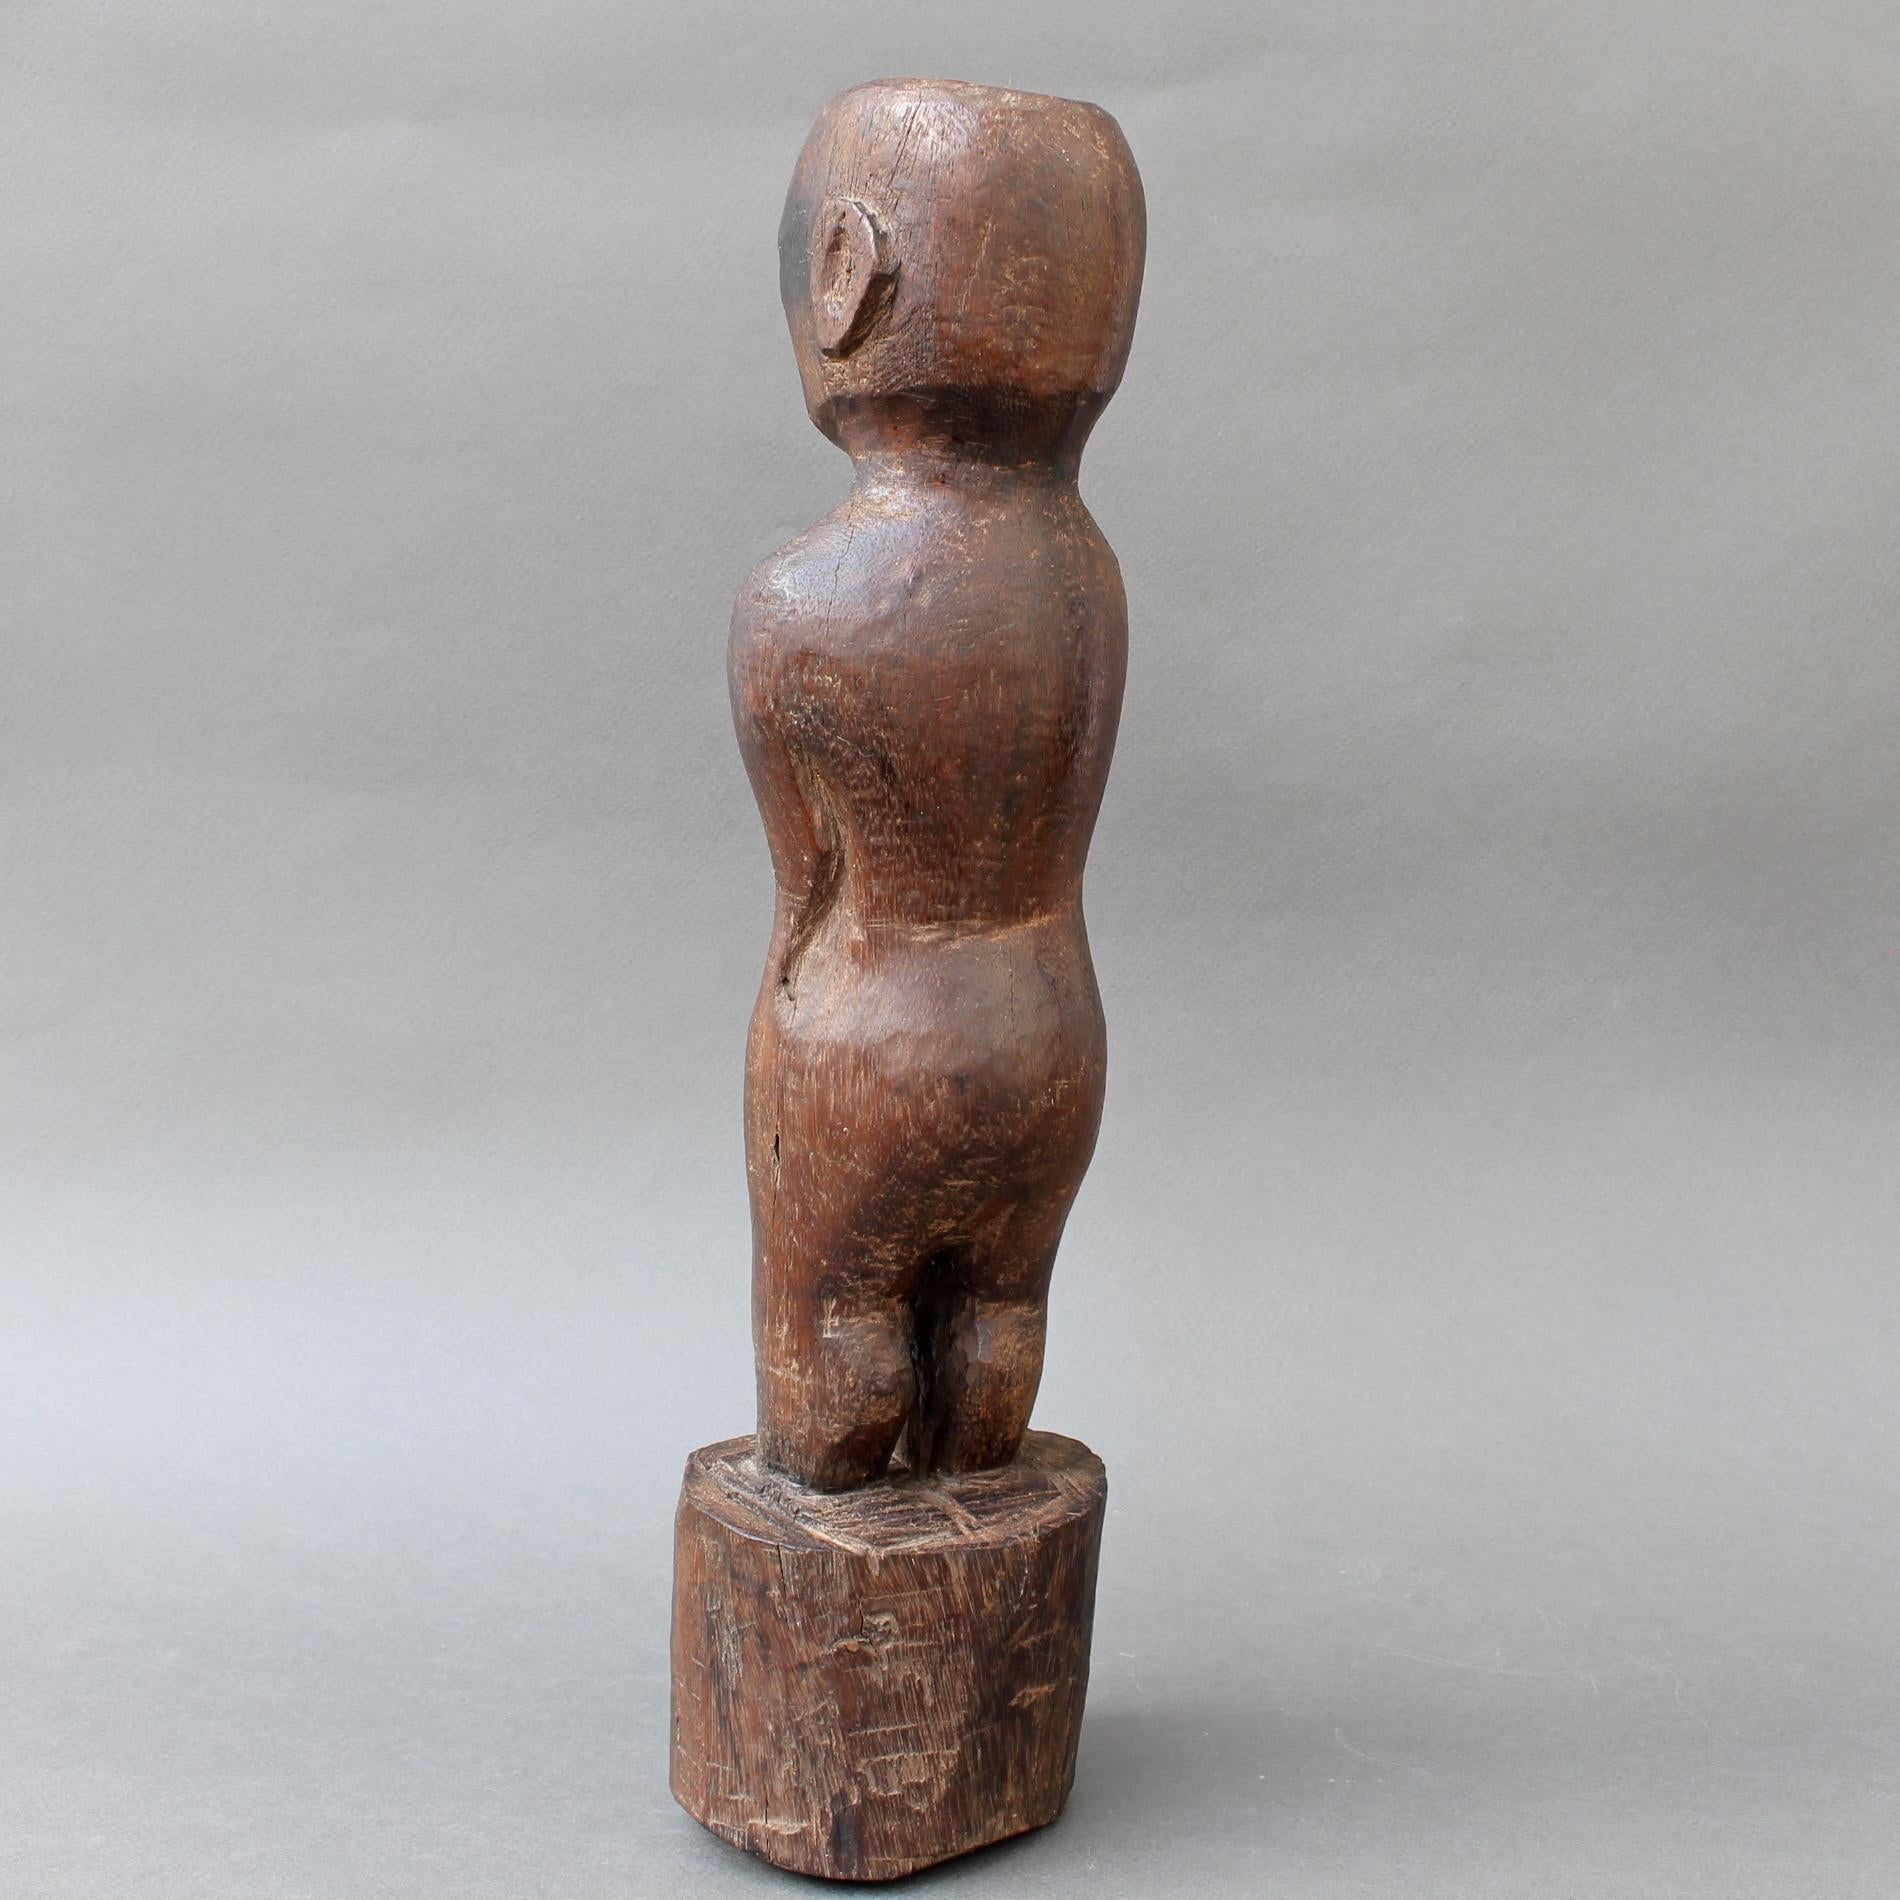 Hand-Carved Wooden Carving or Sculpture of Standing Ancestral Figure from Timor, Indonesia